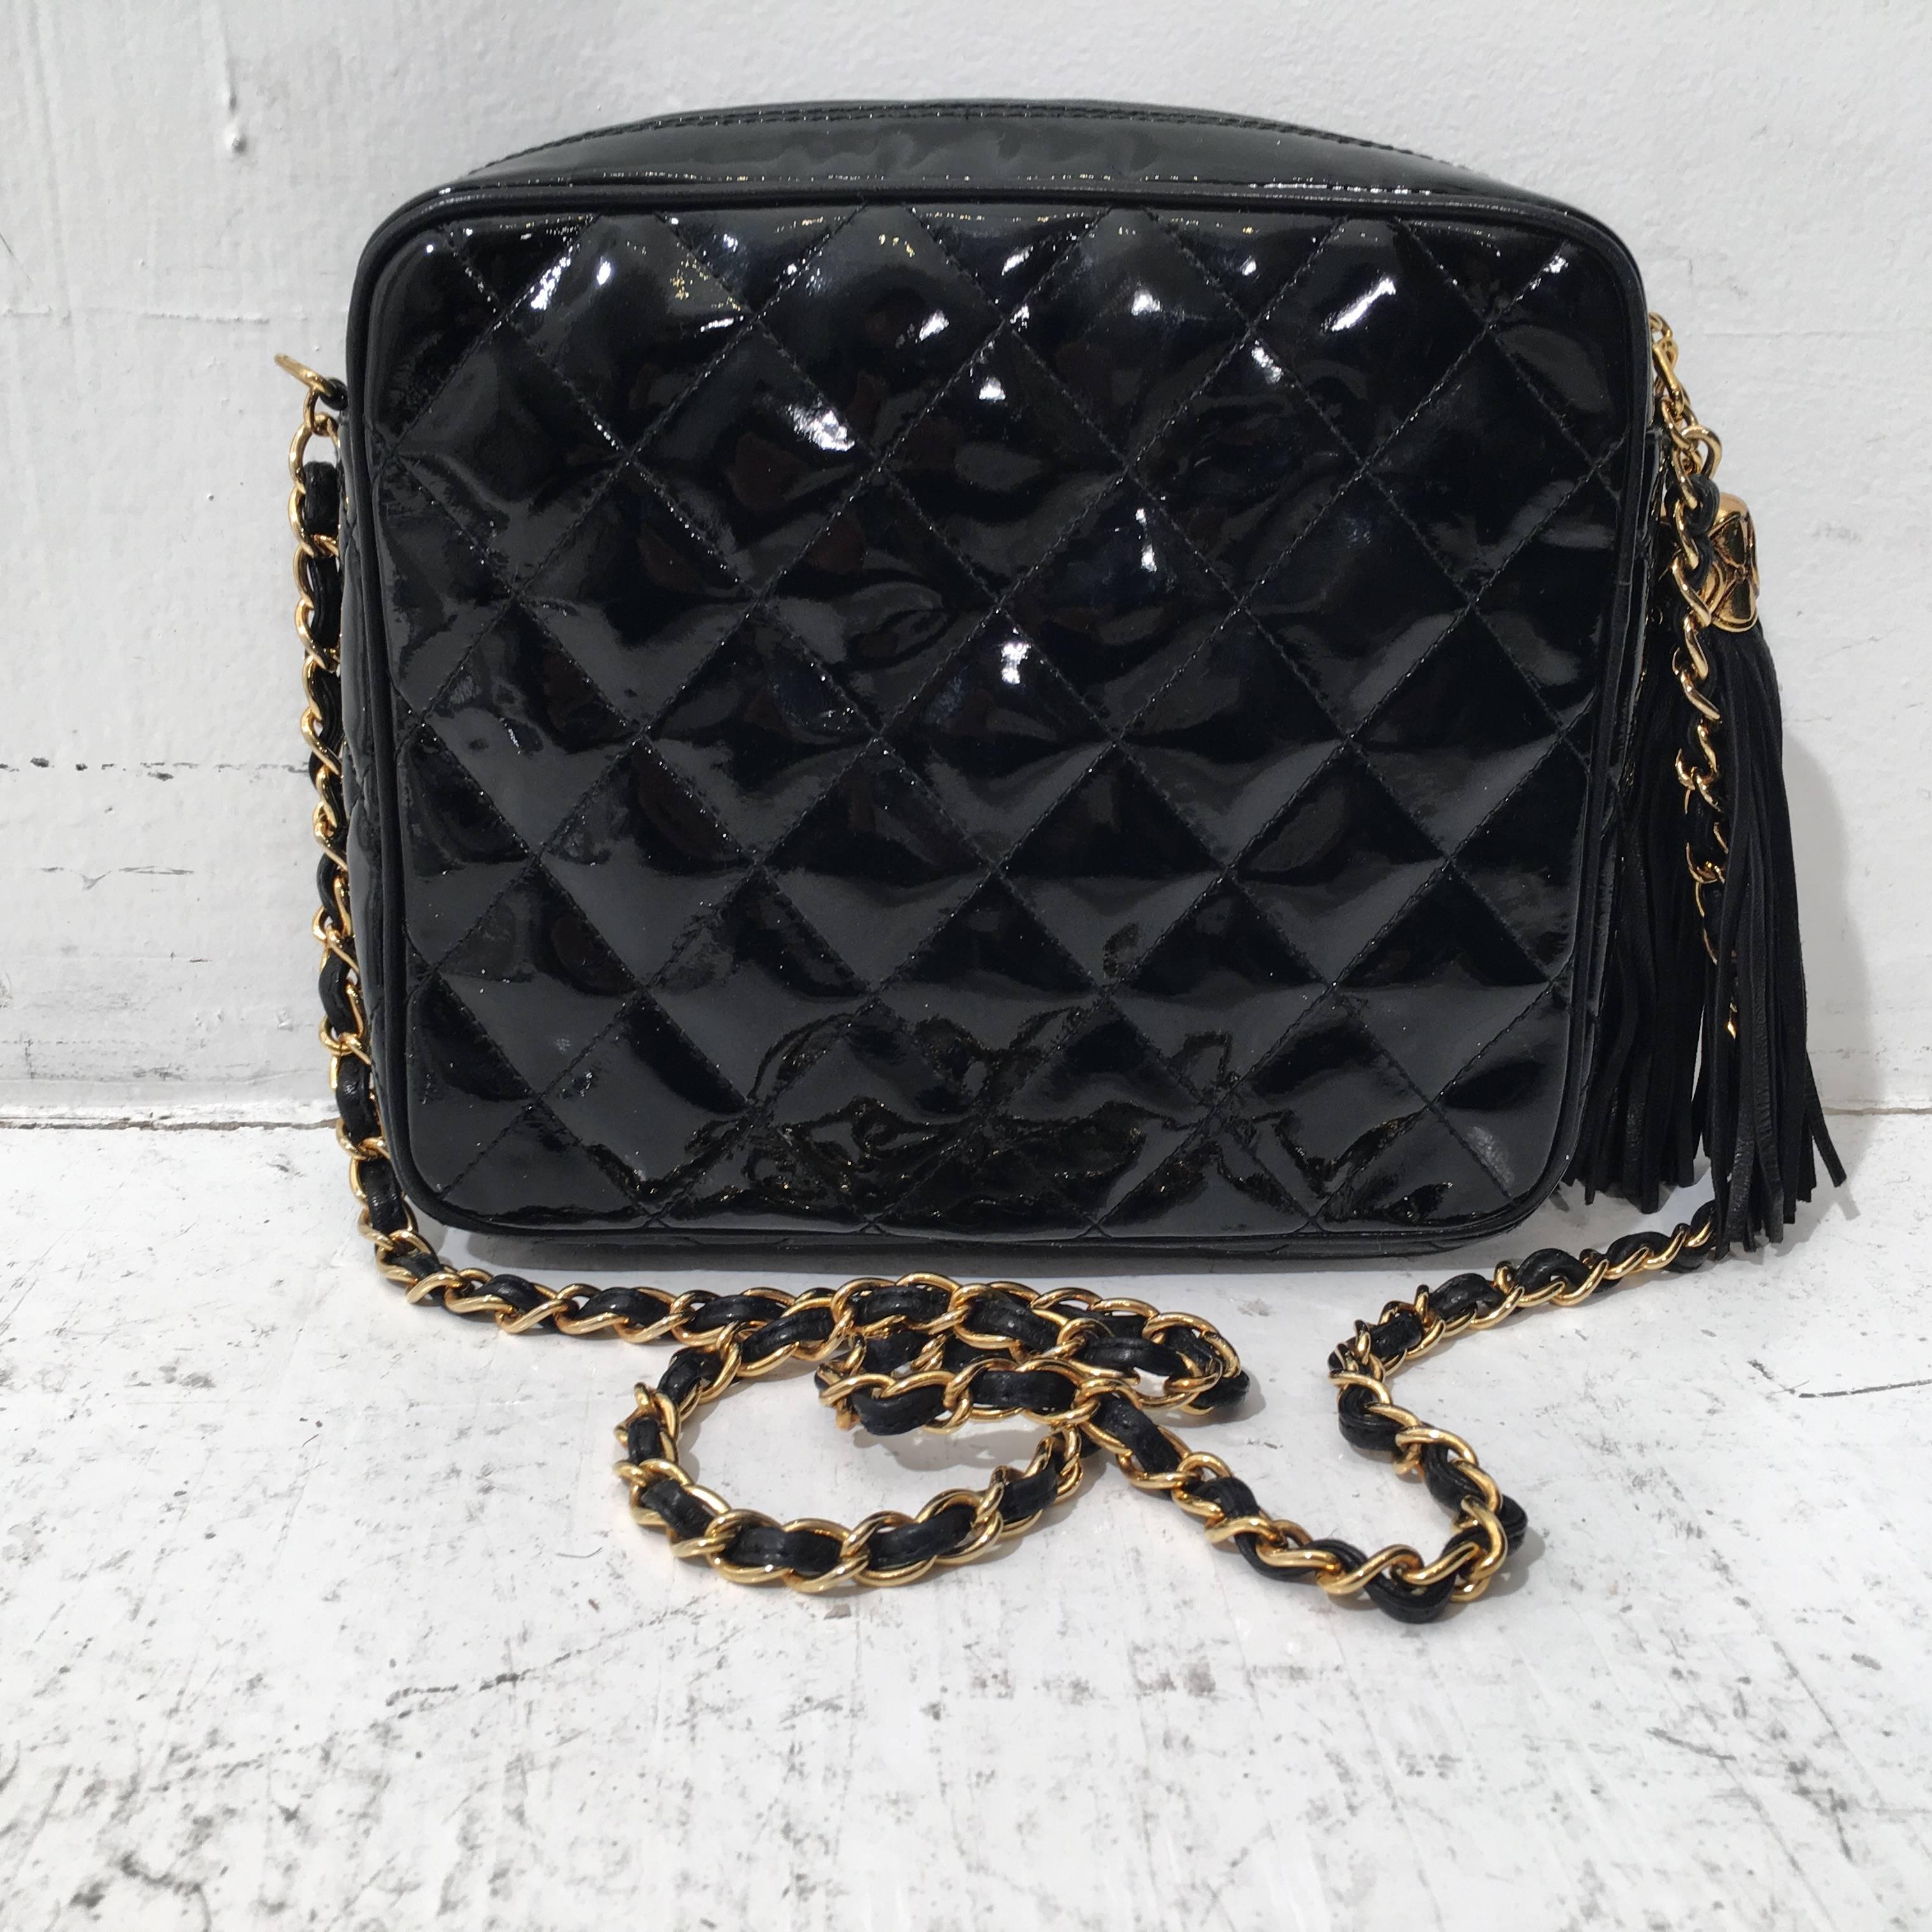 Black Chanel Quilted Patent Leather Crossbody Bag